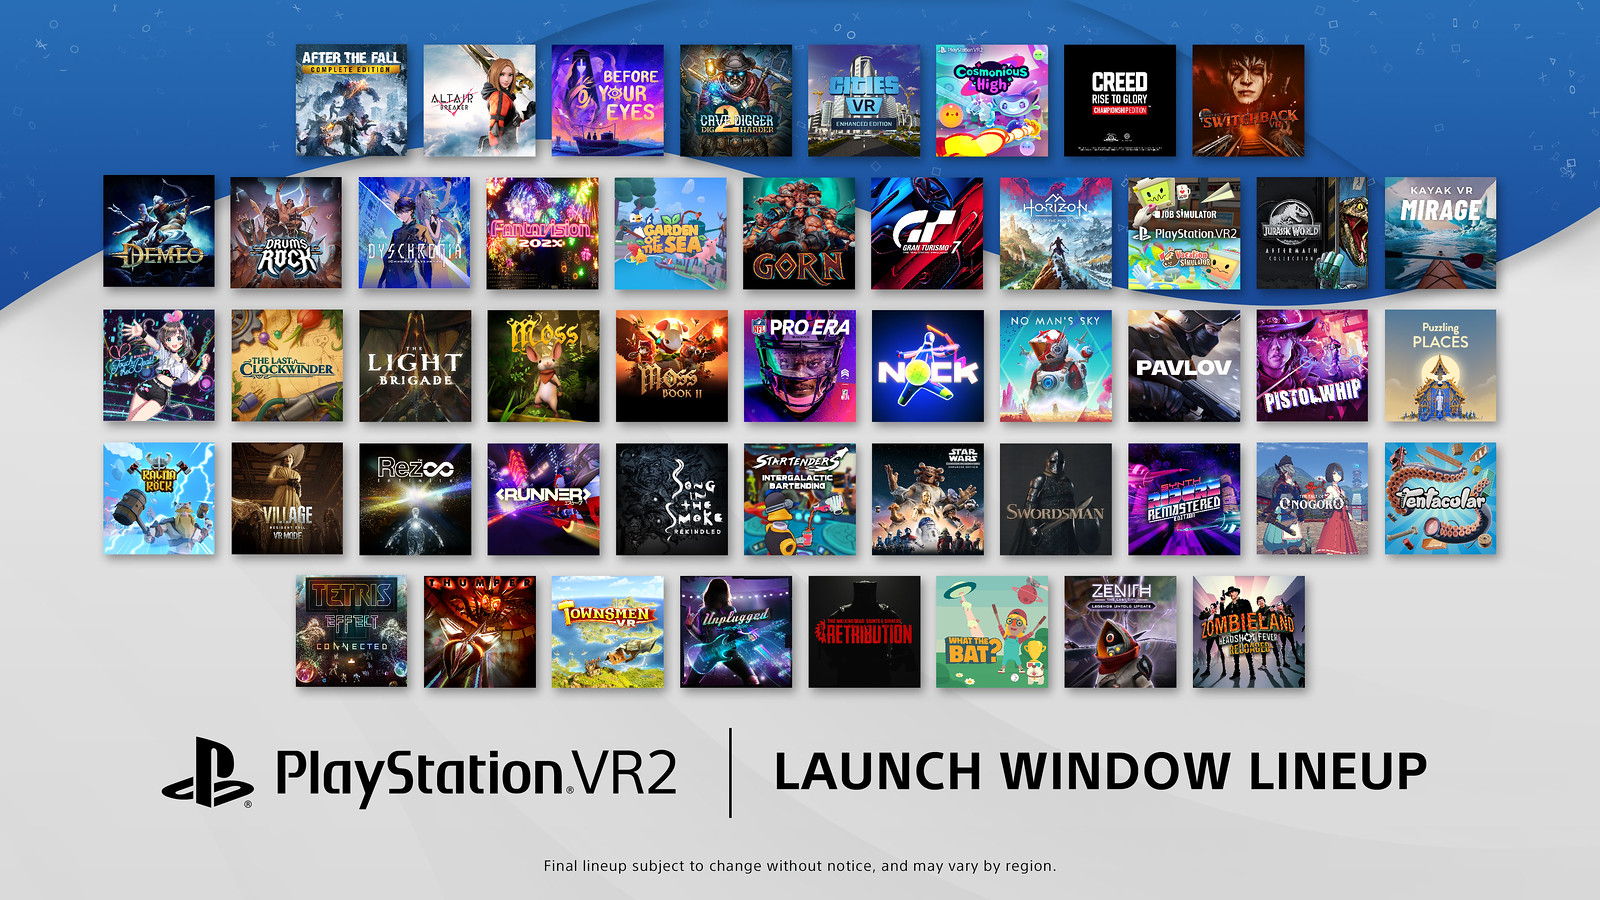 10 new PS VR2 titles revealed, launch window lineup now over 40